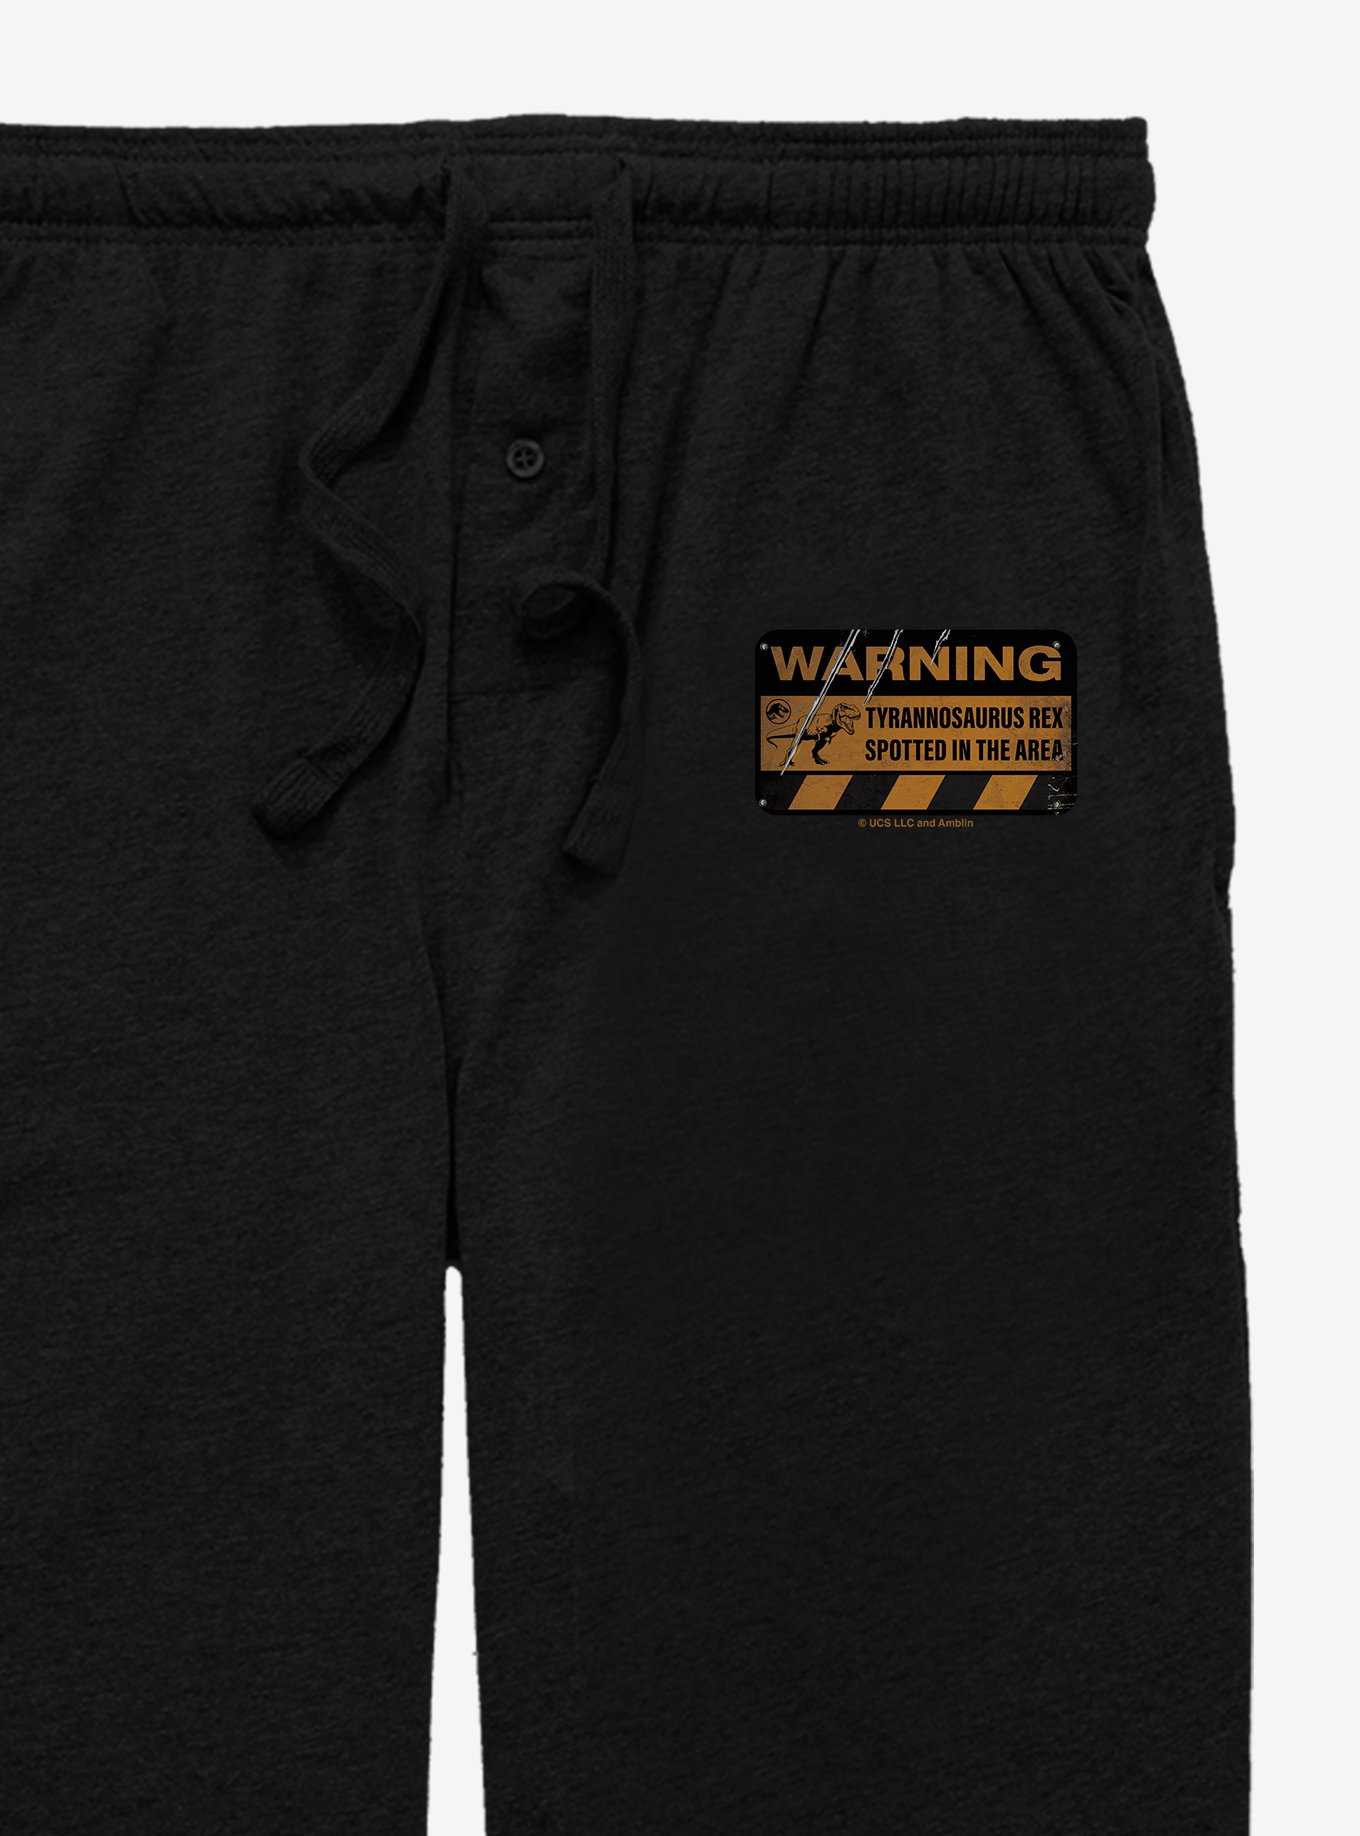 Jurassic World T-Rex Spotted Sign Pajama Pants, , hi-res